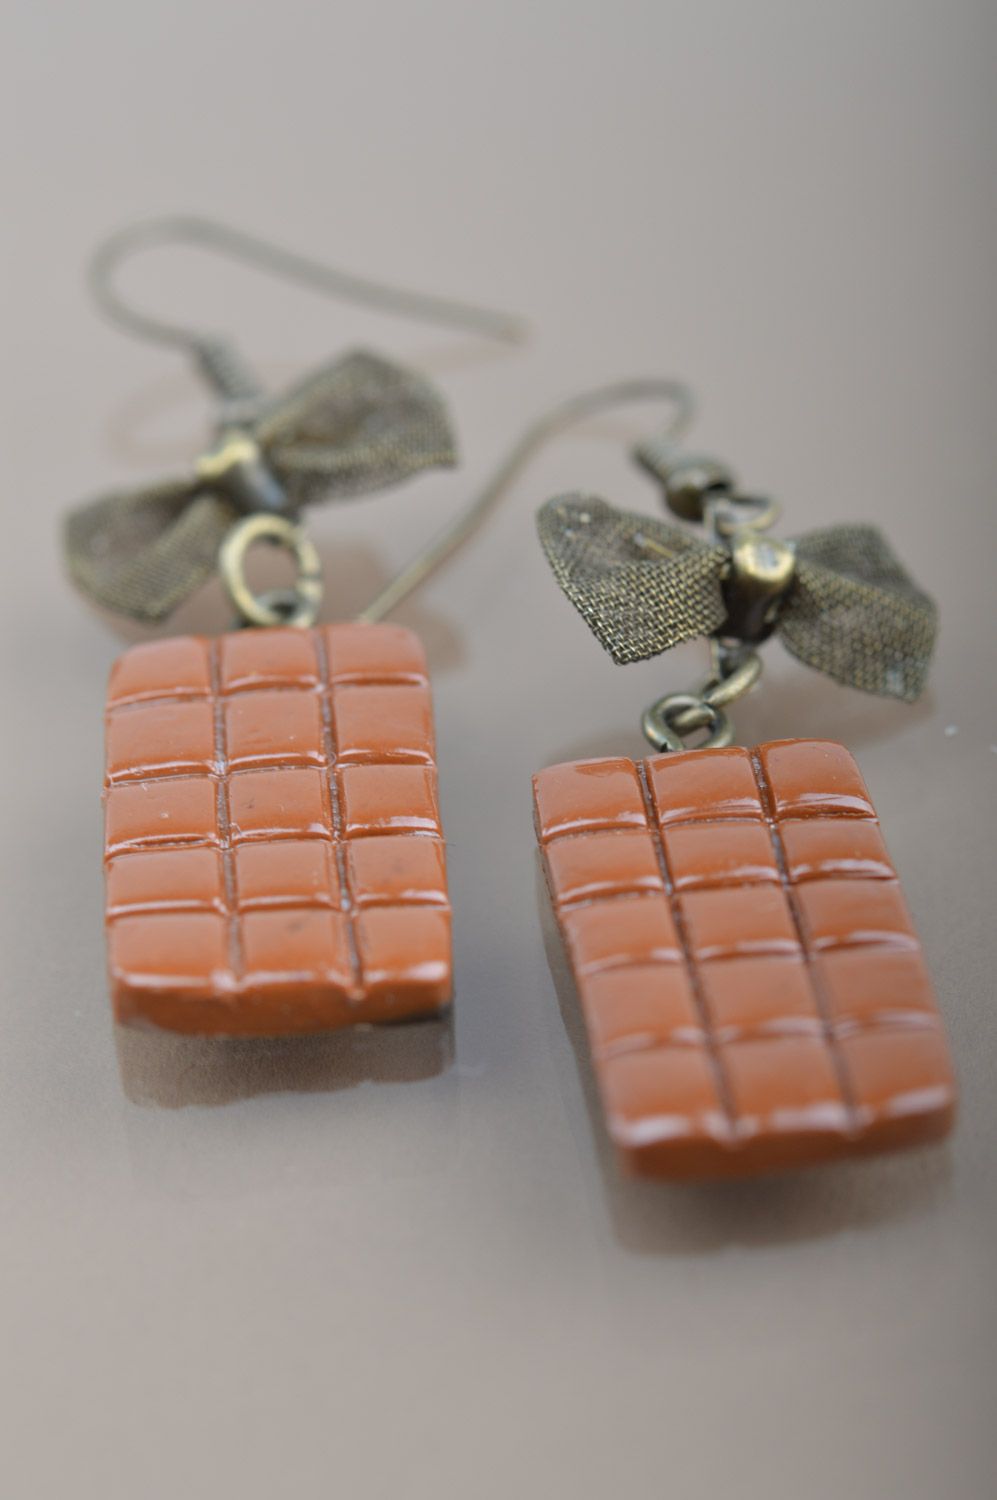 Homemade plastic earrings with charms in the shape of chocolate bars photo 5